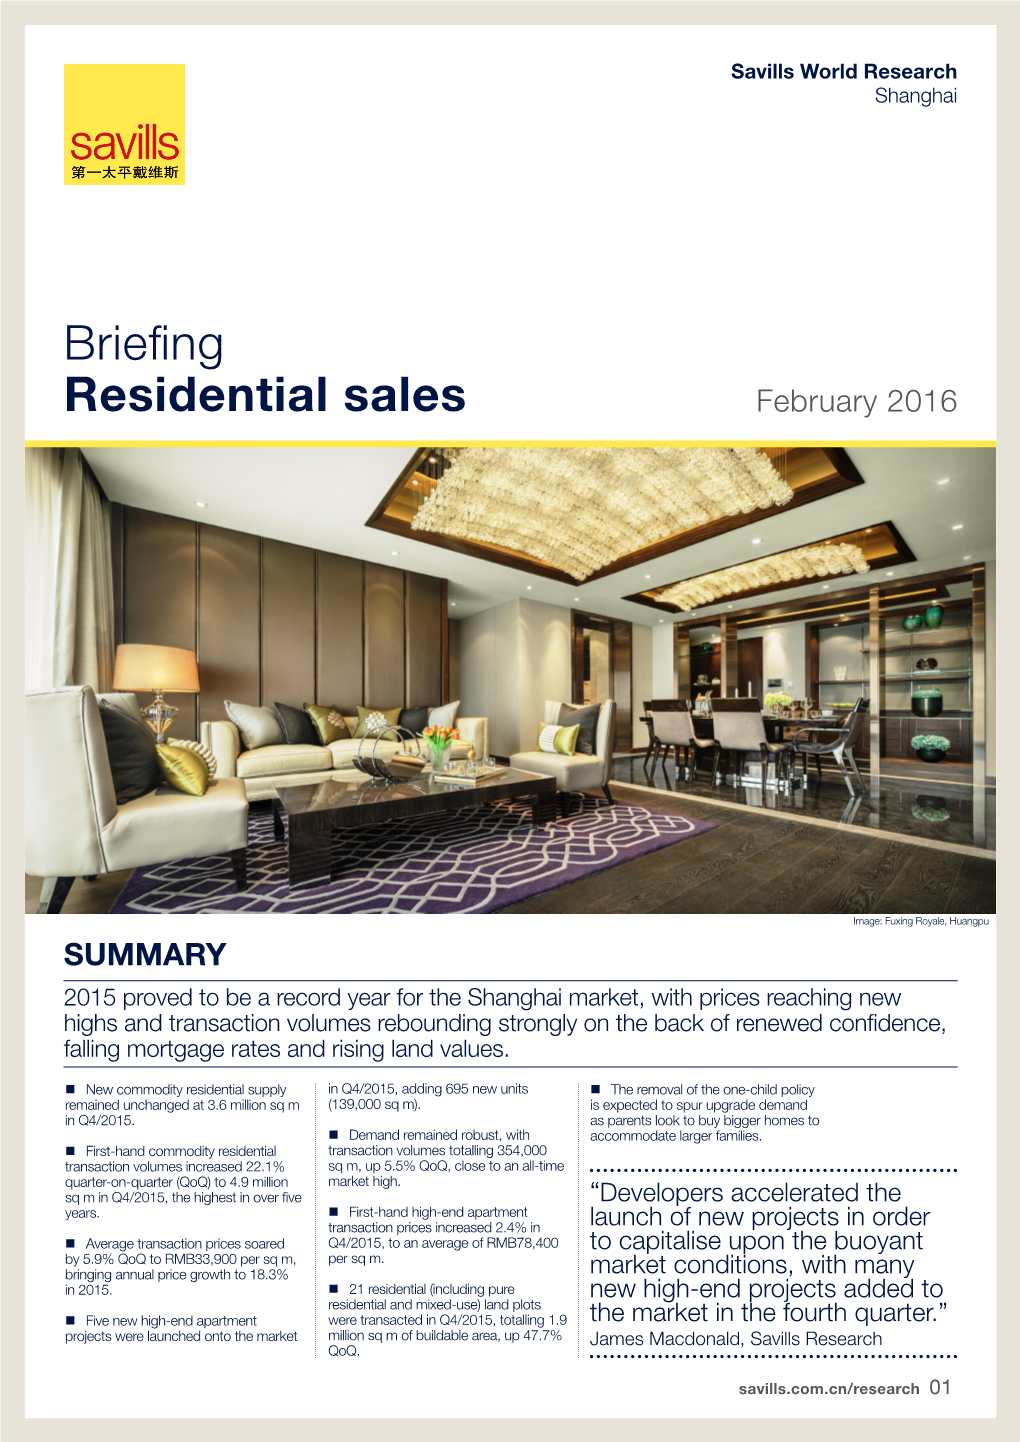 Briefing Residential Sales February 2016